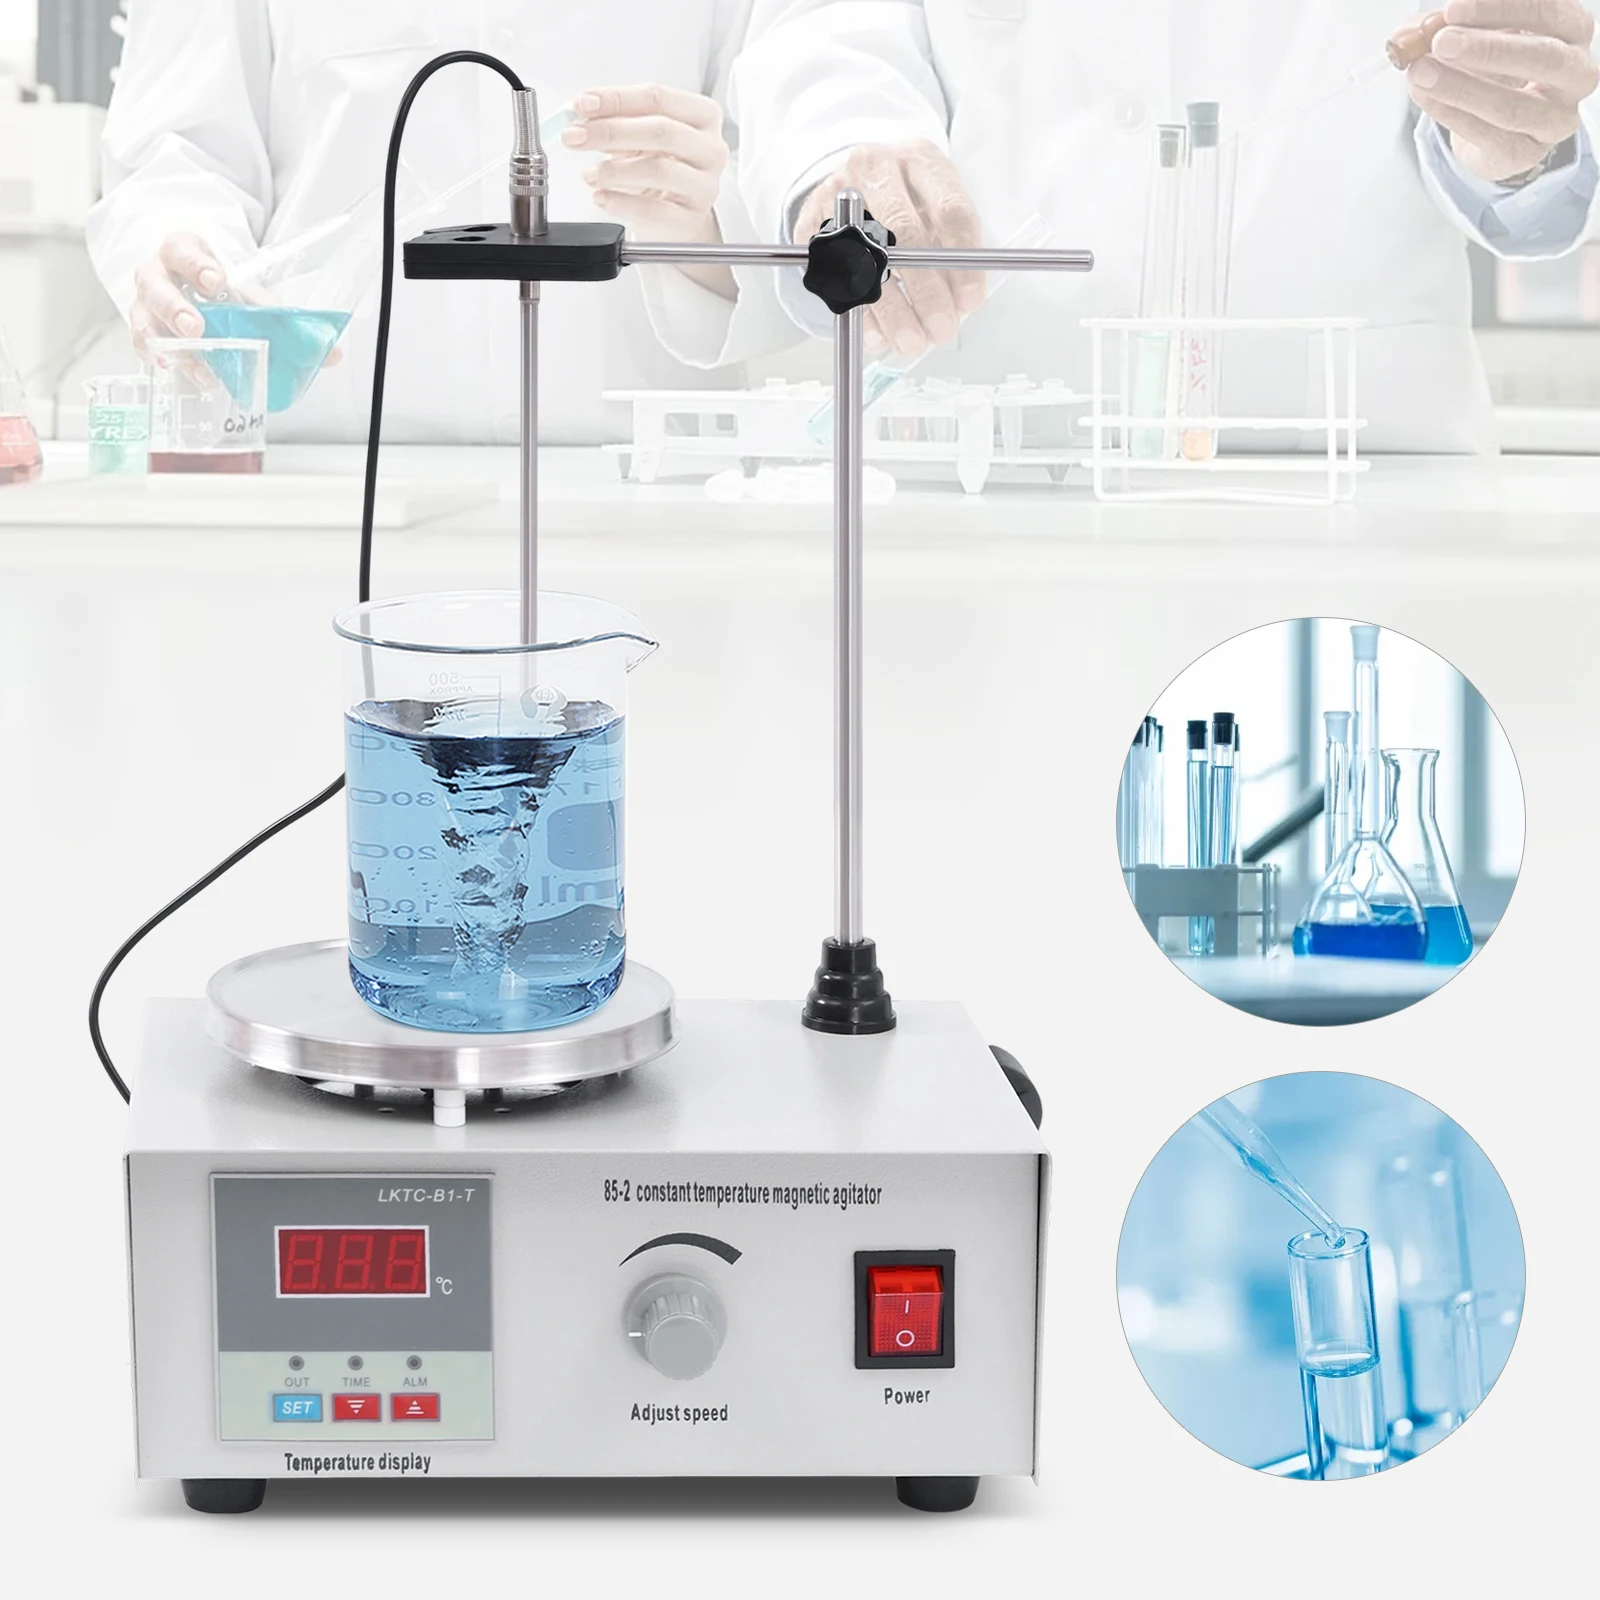 

Magnetic Stirrer 2000ML Hotplate Mixer 2000 RPM Lab Heating Plate Stirrers with Digital Temperature Display Including Stir Bar a